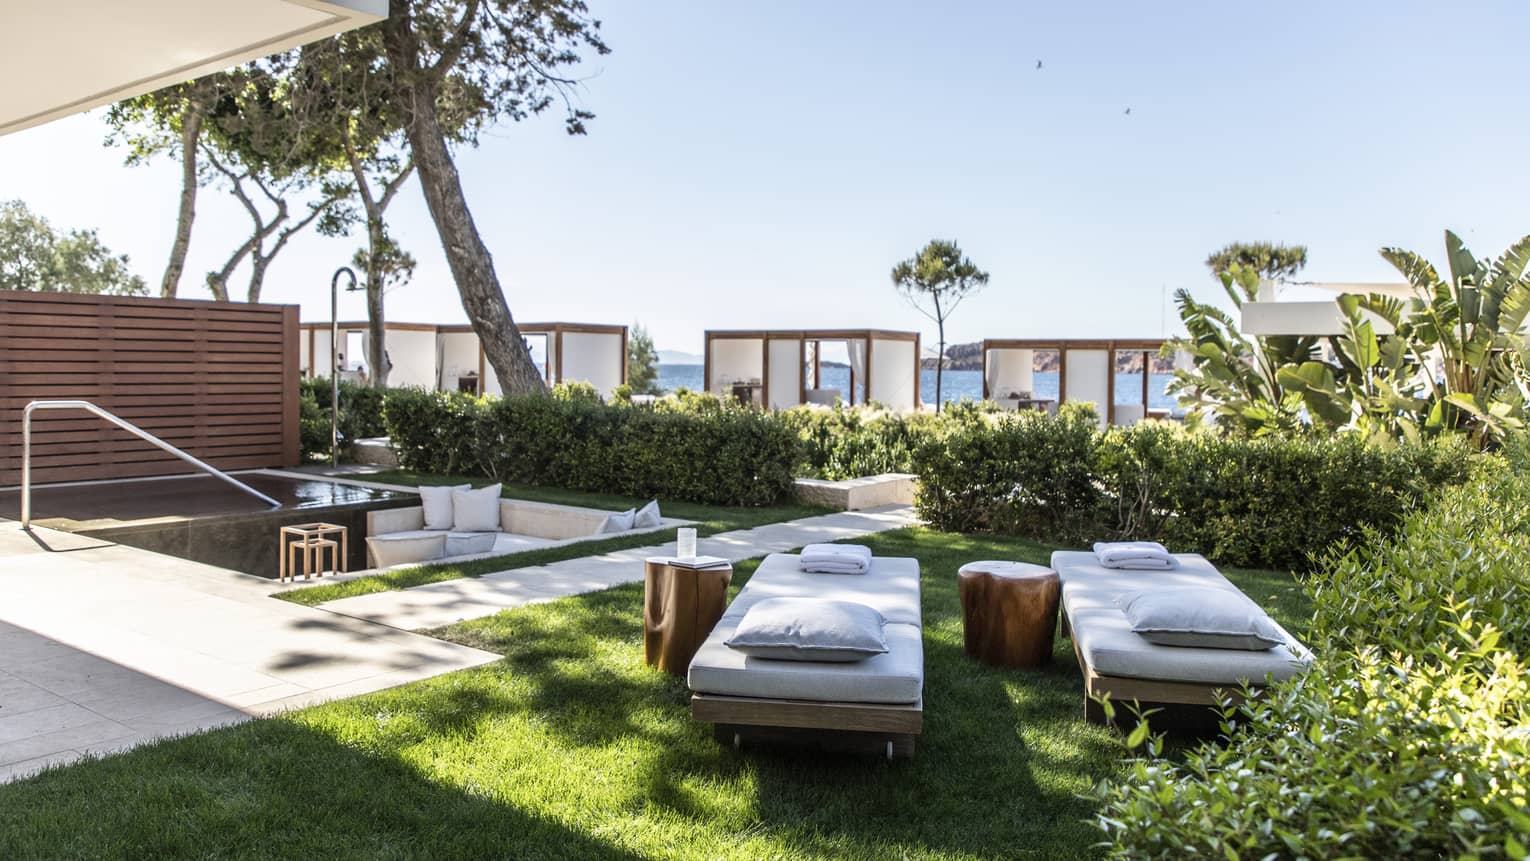 Private garden with two chaise lounges set on the grass, beach cabanas visible in the distance